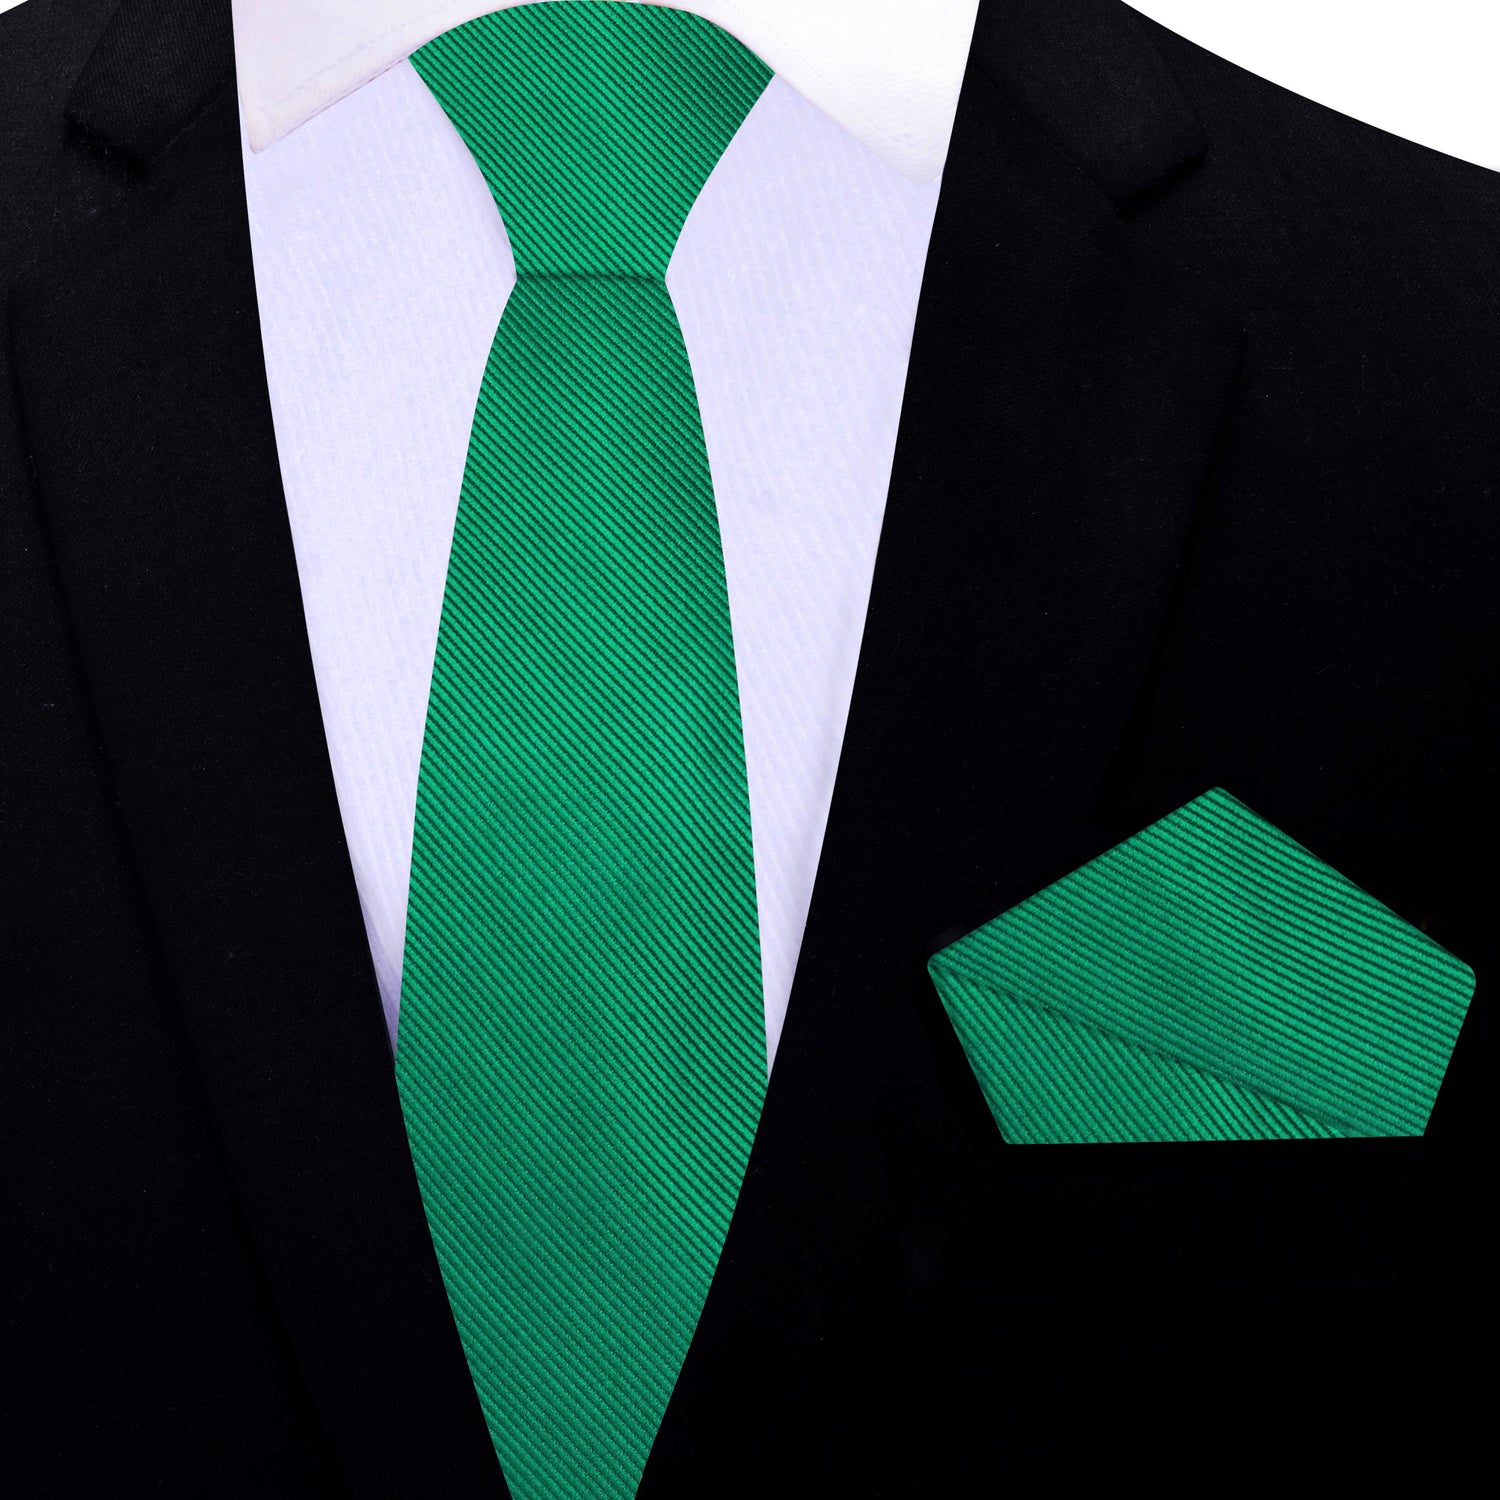 Thin Tie: Solid Green Necktie with Grey and Square